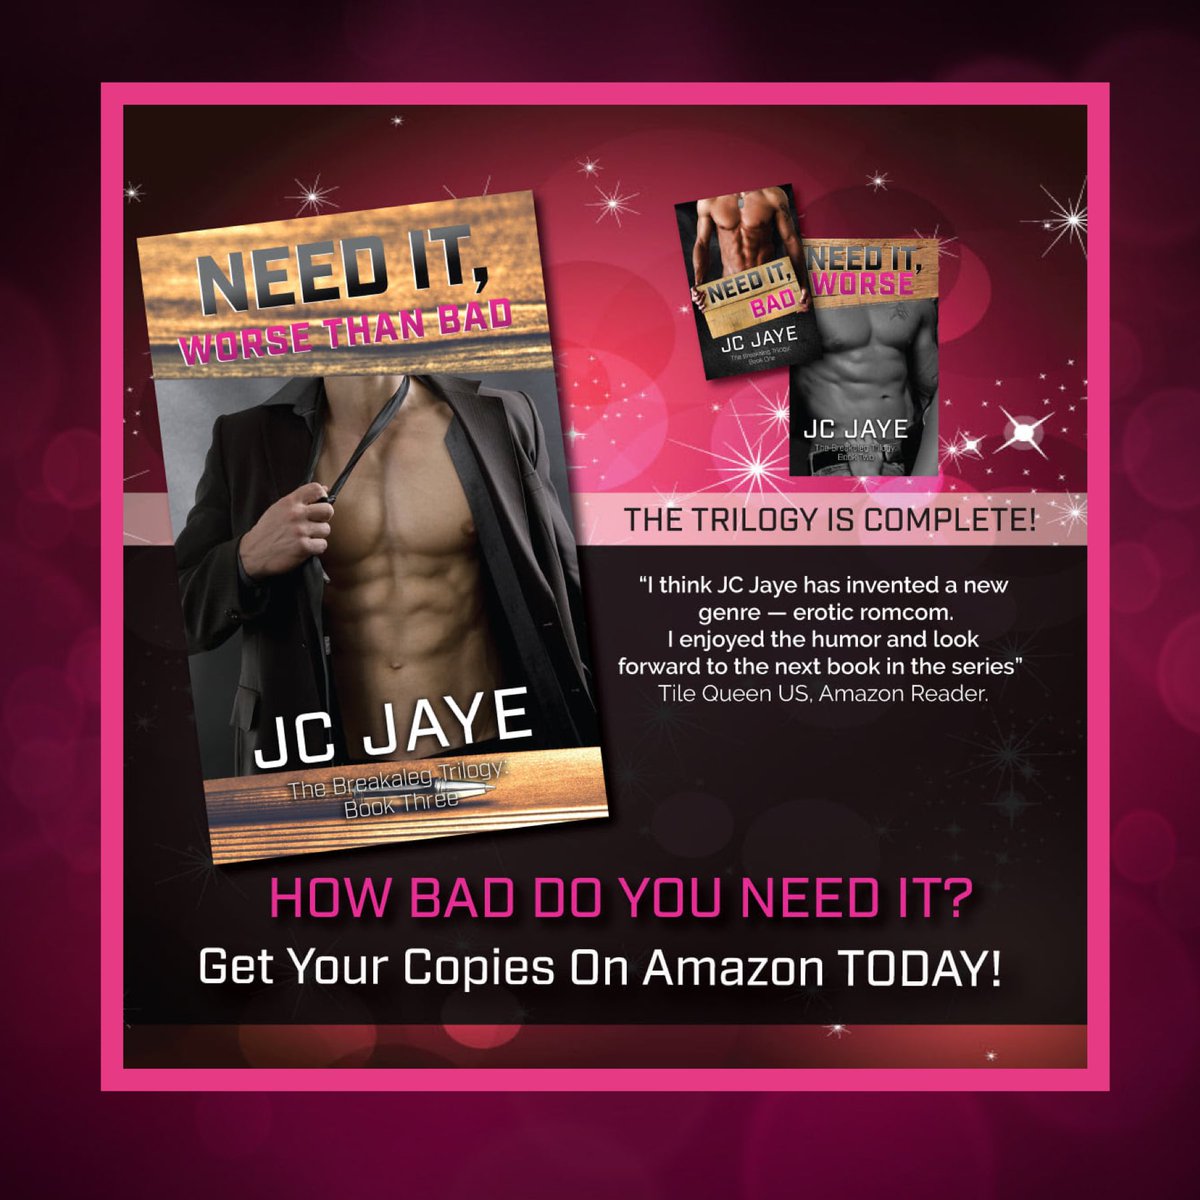 Looking for a new series to binge on? If you're into bad boys, hot sex, and lots of dirty dialogue, #JCJaye has you covered! Check out the Breakaleg Trilogy on #KindleUnlimited. bit.ly/389IyTA

@HEAPRMore #SteamyRomCom